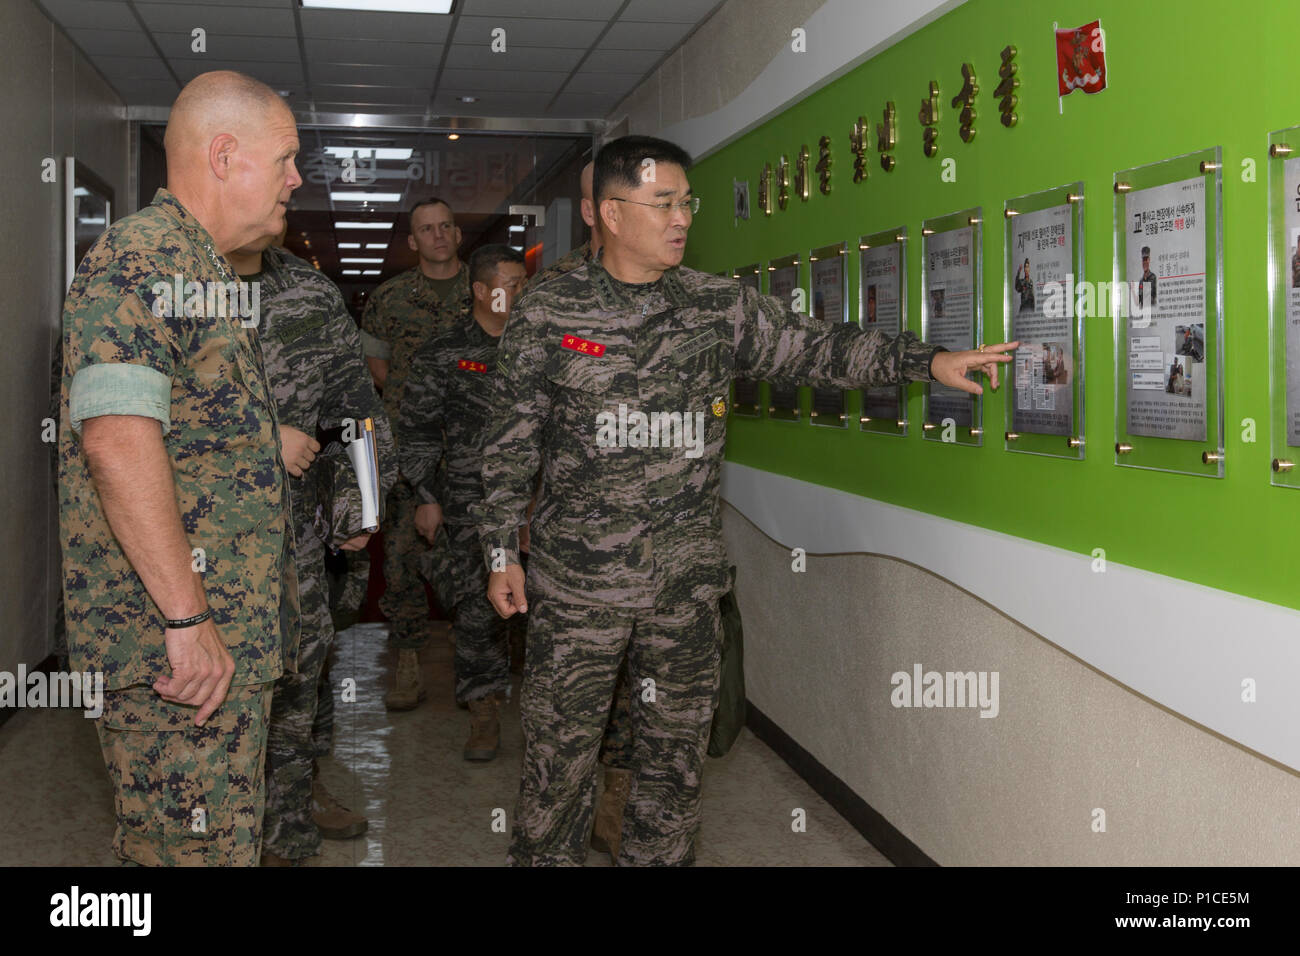 Republic of Korea (ROK) Marine Corps Gen. Shin Hyun-joon, commandant of the ROK Marine Corps, right, speaks about a display to Commandant of the Marine Corps Gen. Robert B. Neller at the ROK Marine Corps Headquarters, Baran, South Korea, Oct. 15, 2016. Neller met with Hyun-joon to strengthen the military-to-military relationship between the two countries. (U.S. Marine Corps photo by Cpl. Samantha K. Braun) Stock Photo